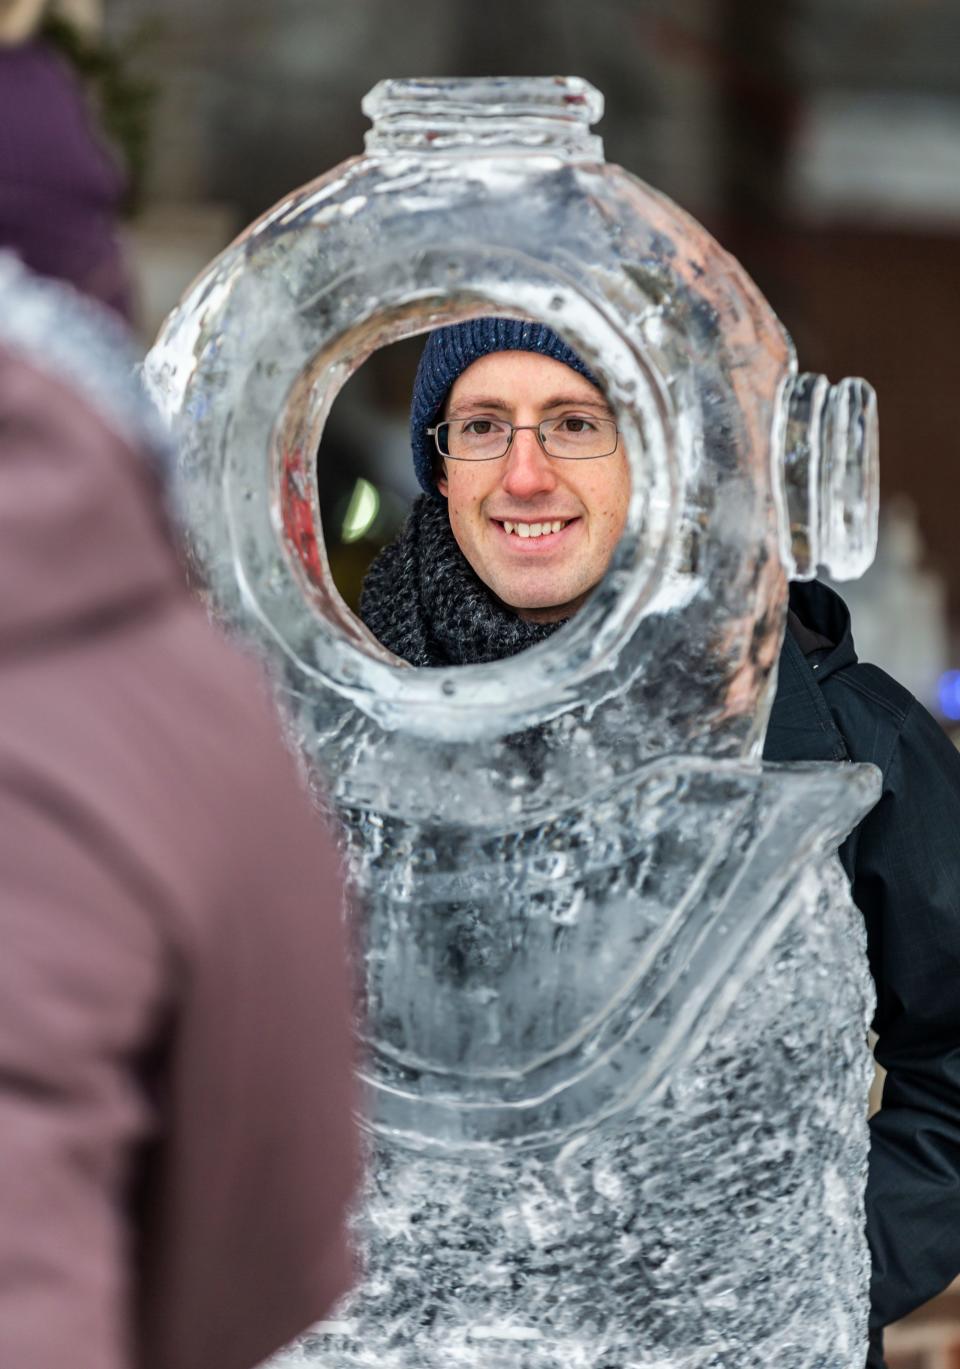 Joe Alberth of Delafield poses for a photo with an ice sculpture during the 4th annual DelaFREEZE event in downtown Delafield on Saturday, Jan. 08, 2022. The event, hosted by the Delafield Chamber of Commerce, features a variety of winter-themed attractions.